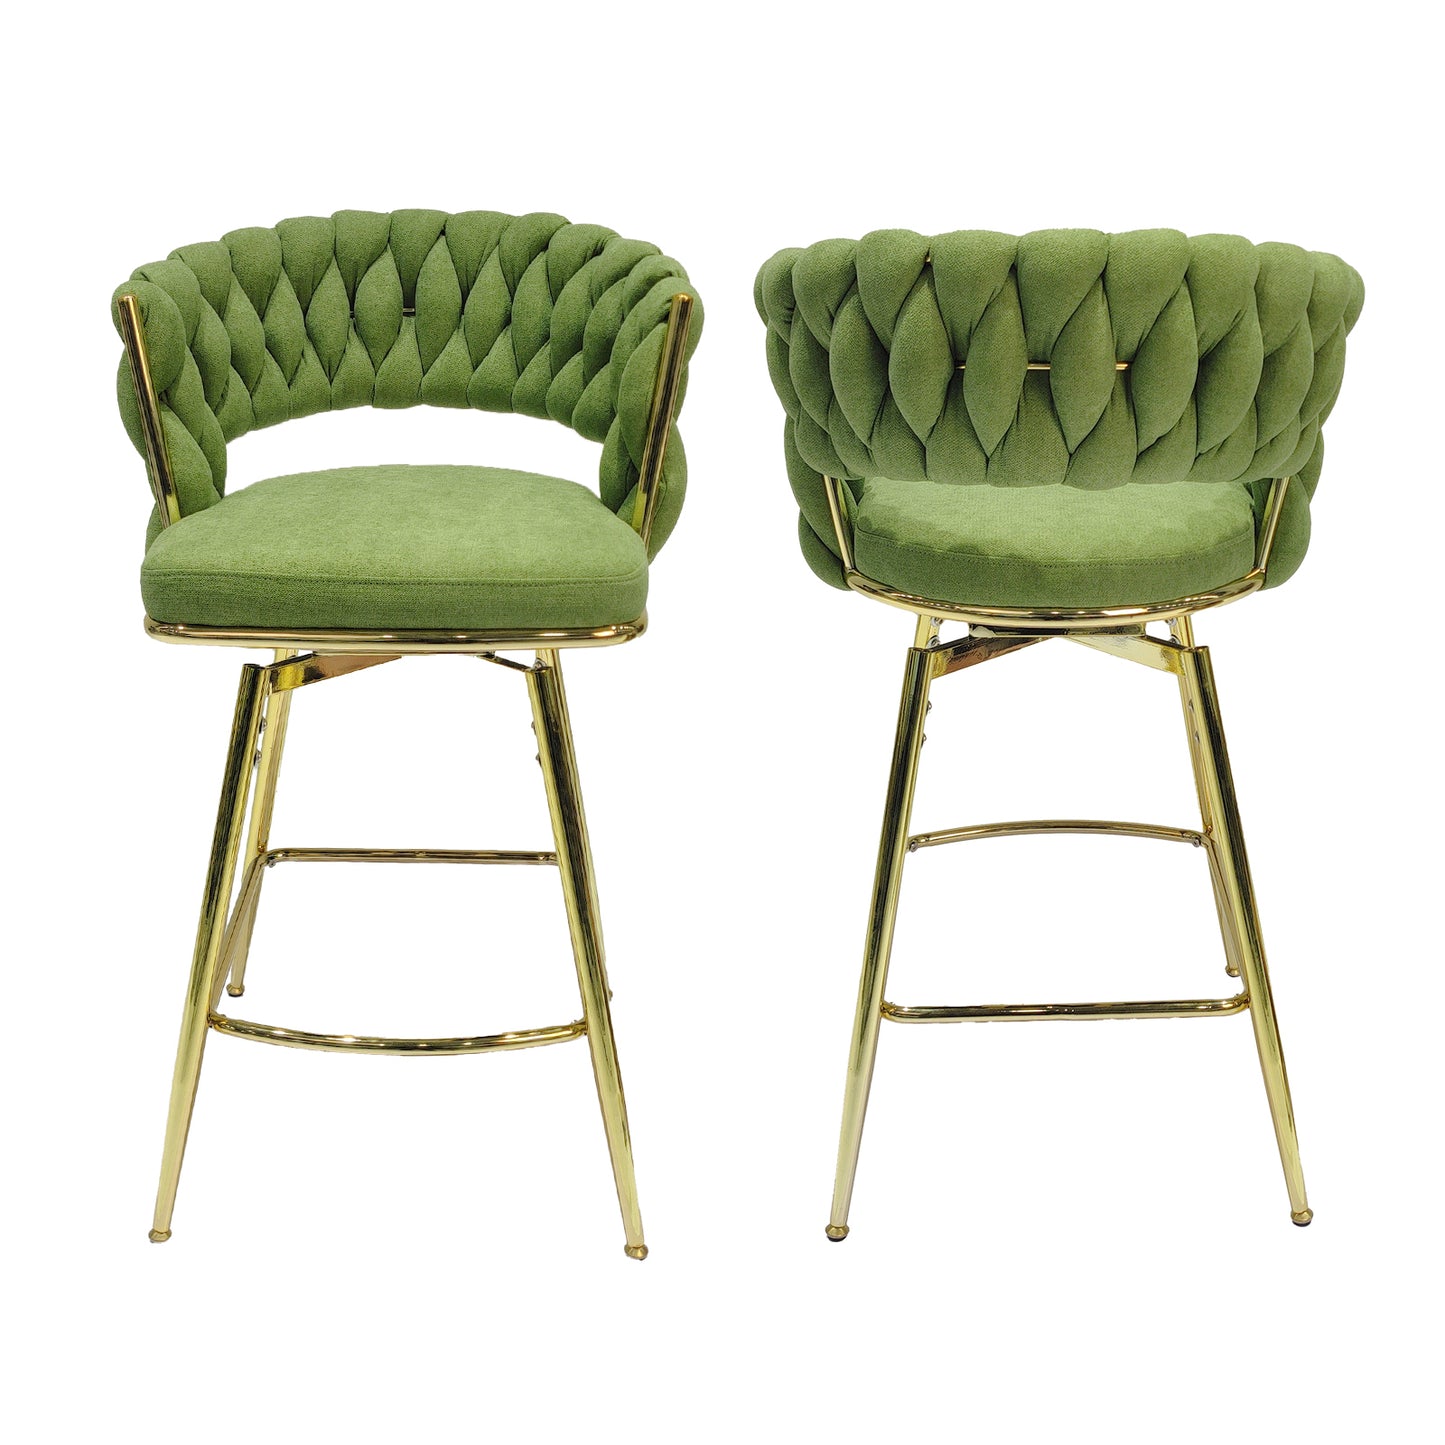 Bar Chair Linen Woven Bar Stool Set of 4,Golden legs Barstools No Adjustable Kitchen Island Chairs,360 Swivel Bar Stools Upholstered Bar Chair Counter Stool Arm Chairs with Back Footrest, (Green)